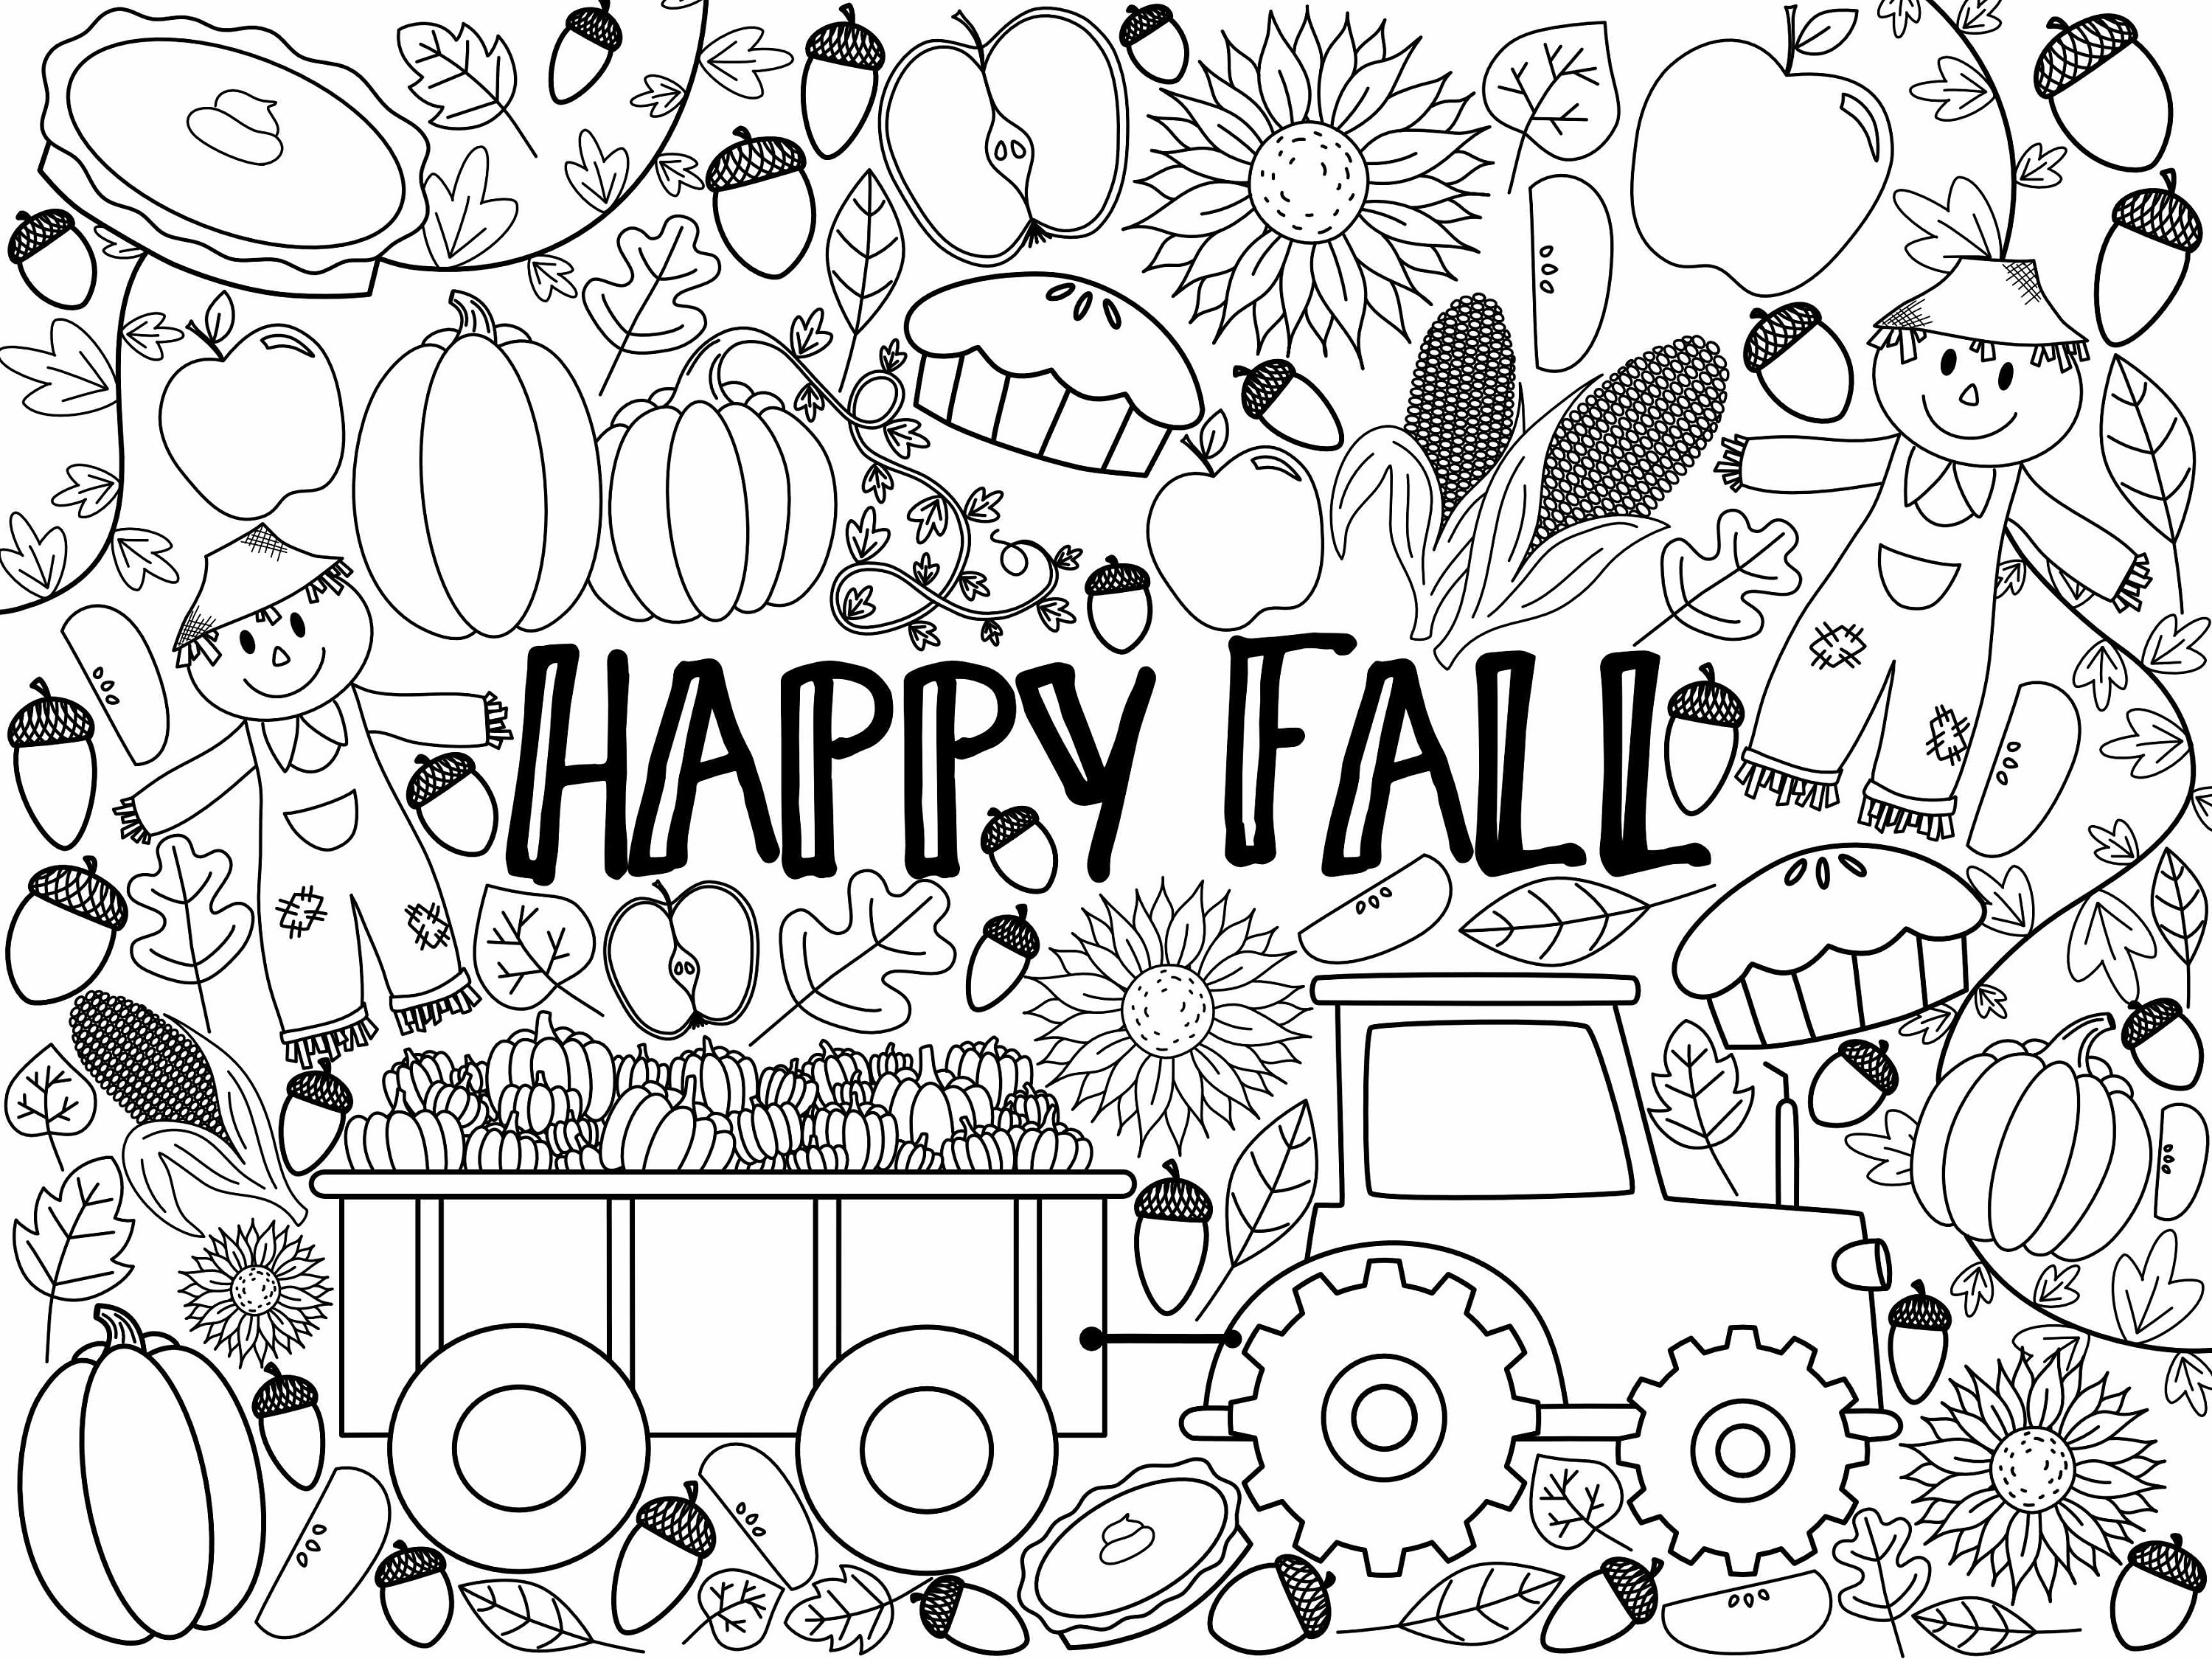 Giant fall coloring page digital download